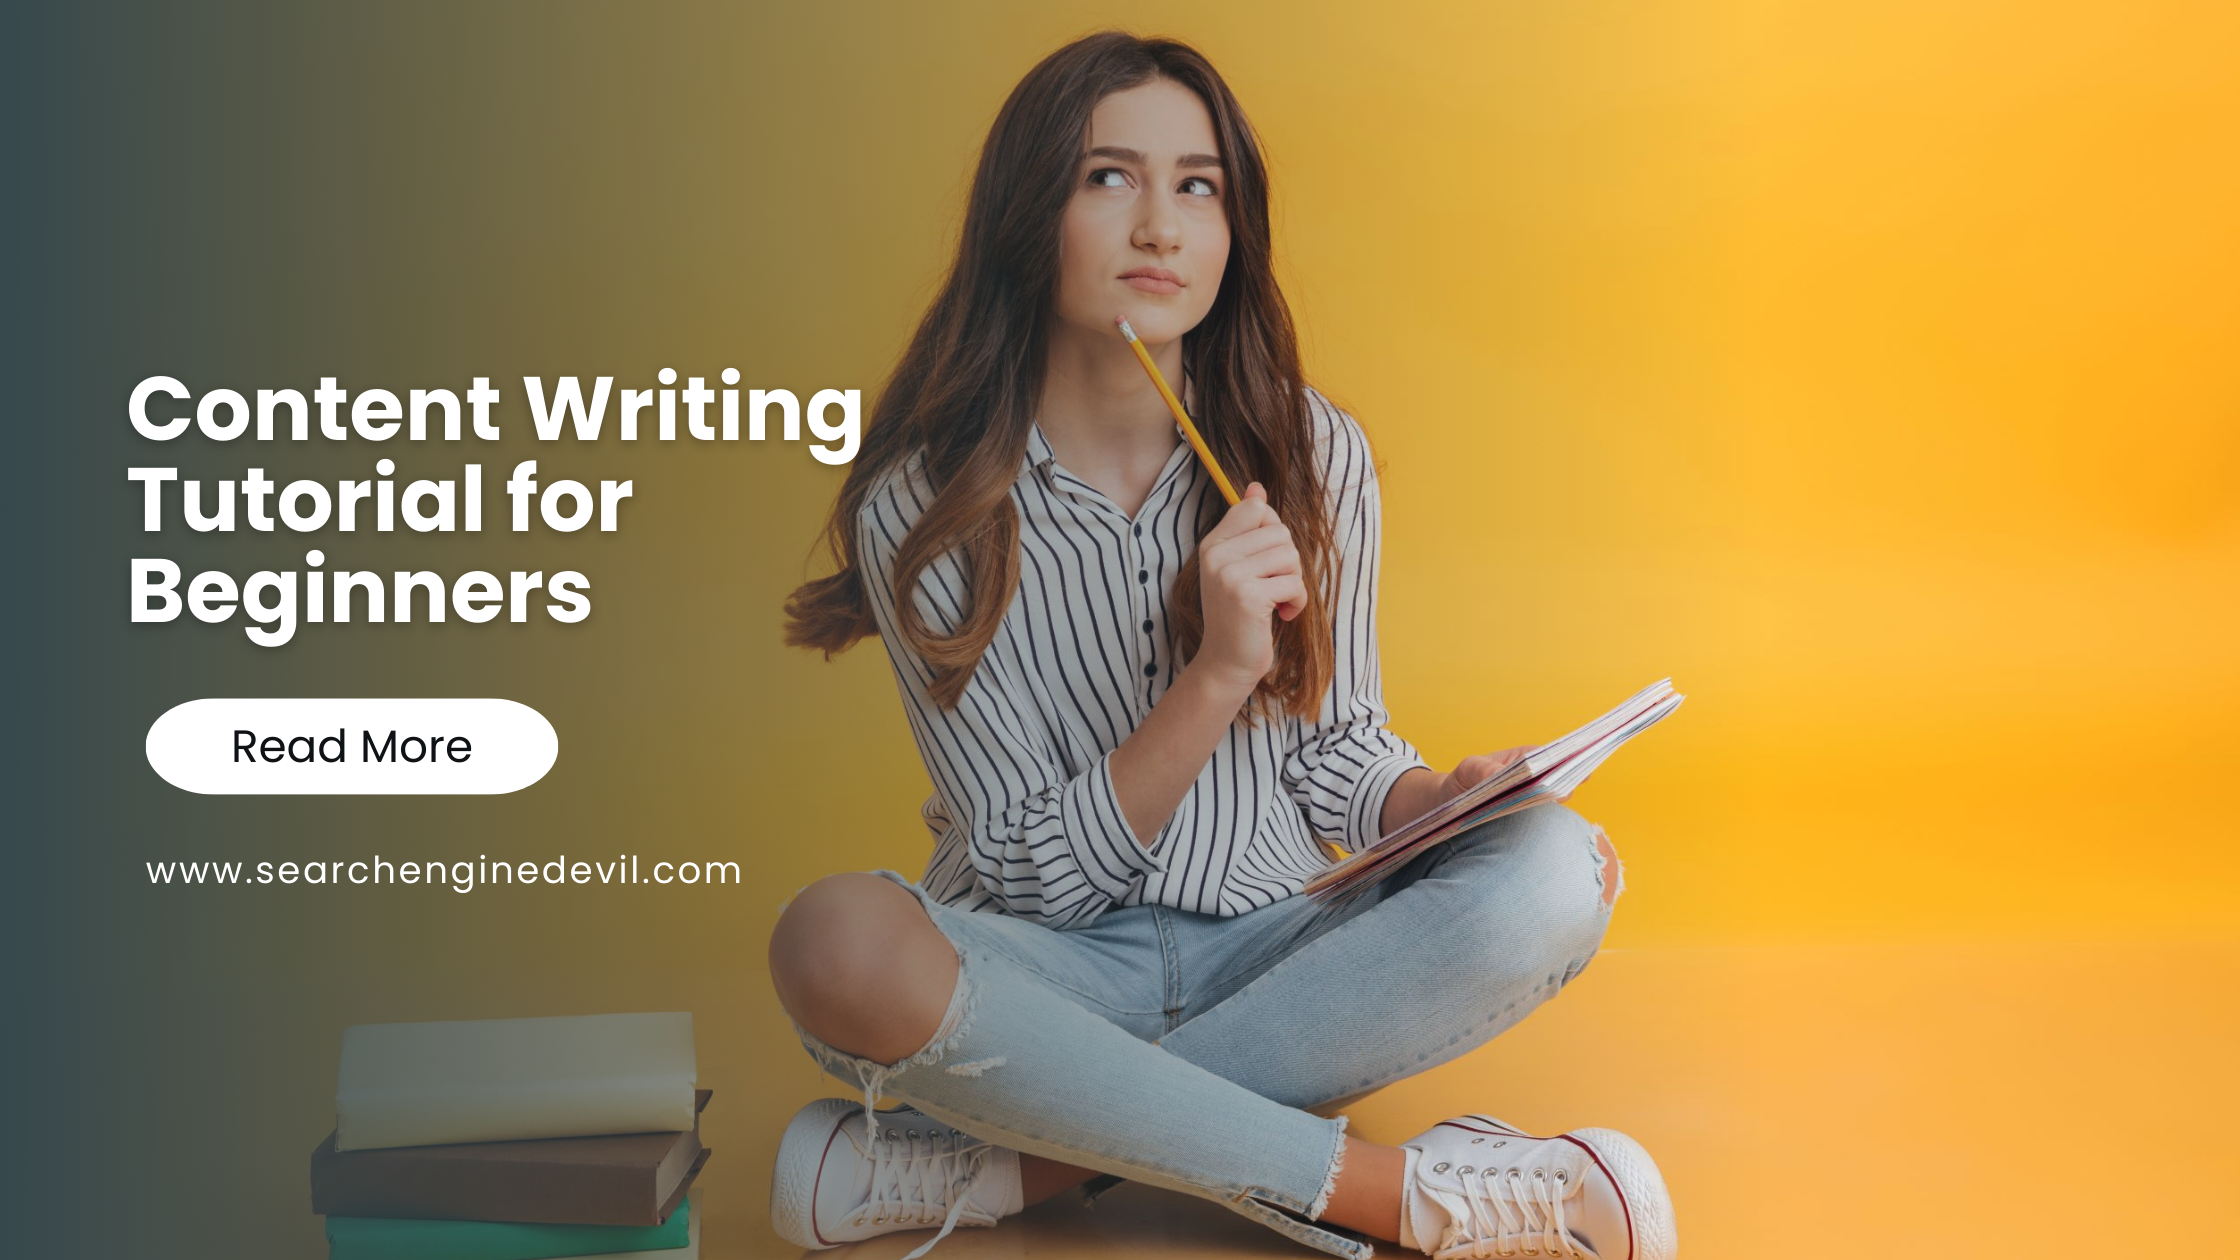 Content Writing Tutorial for Beginners